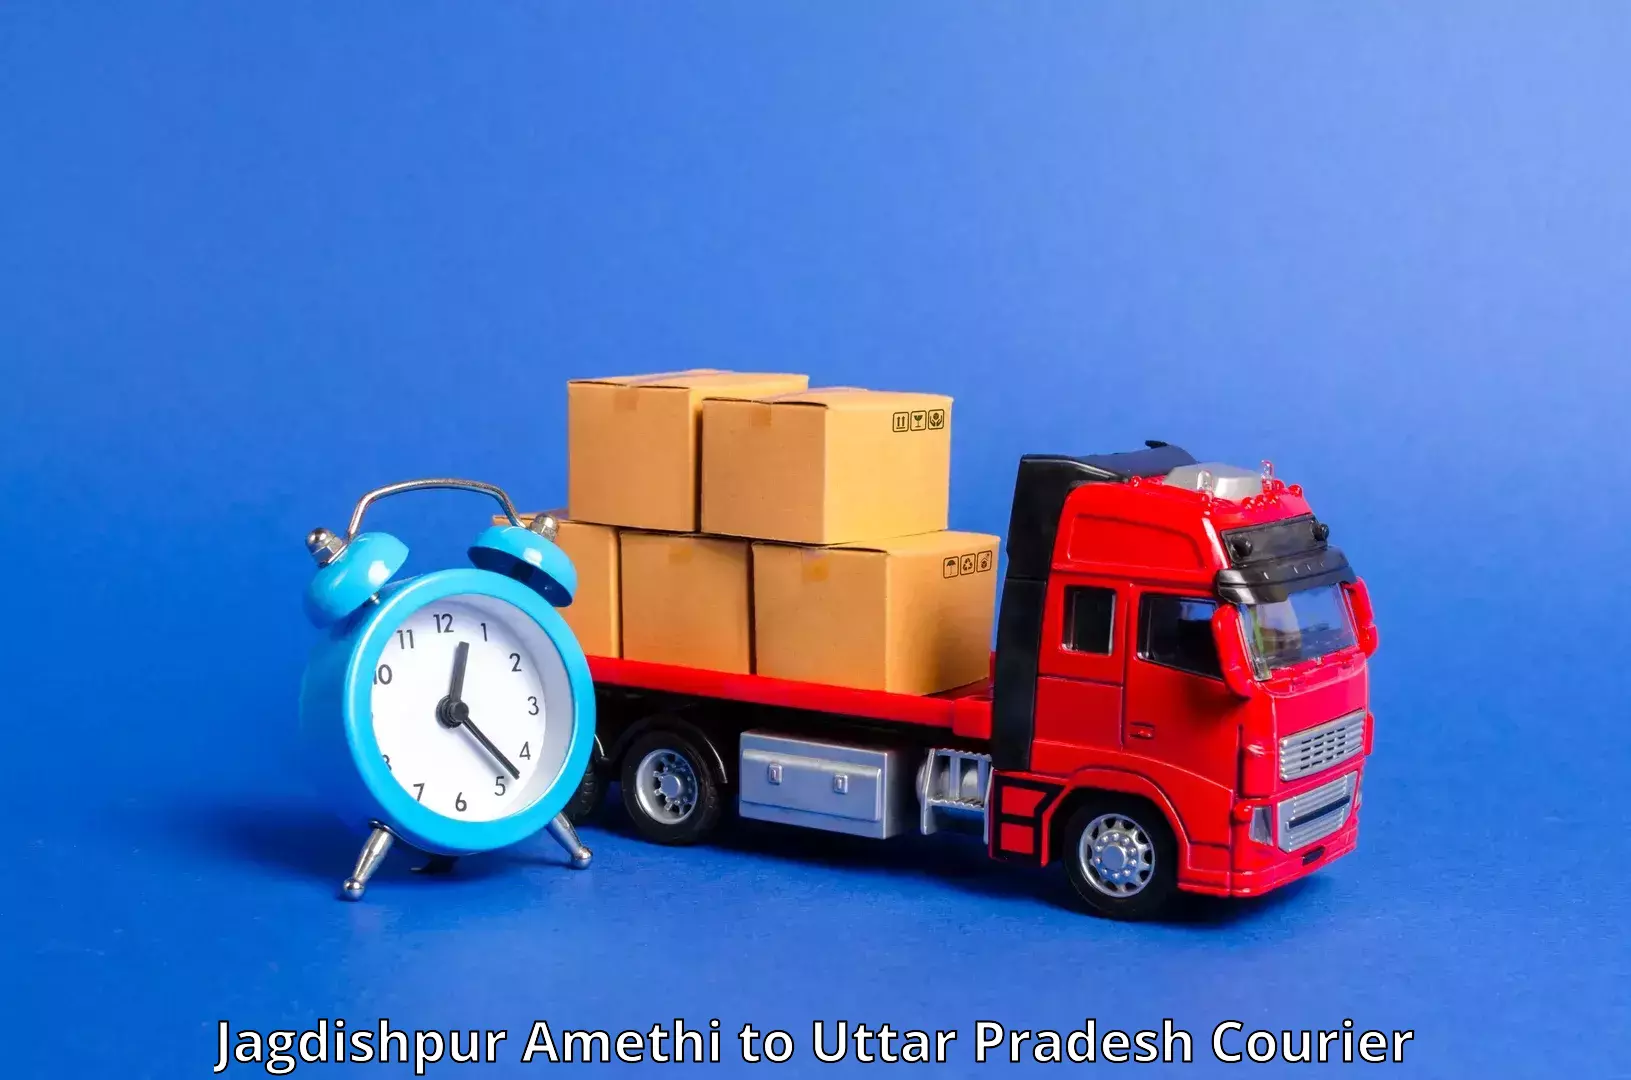 Reliable courier services Jagdishpur Amethi to Siddharthnagar